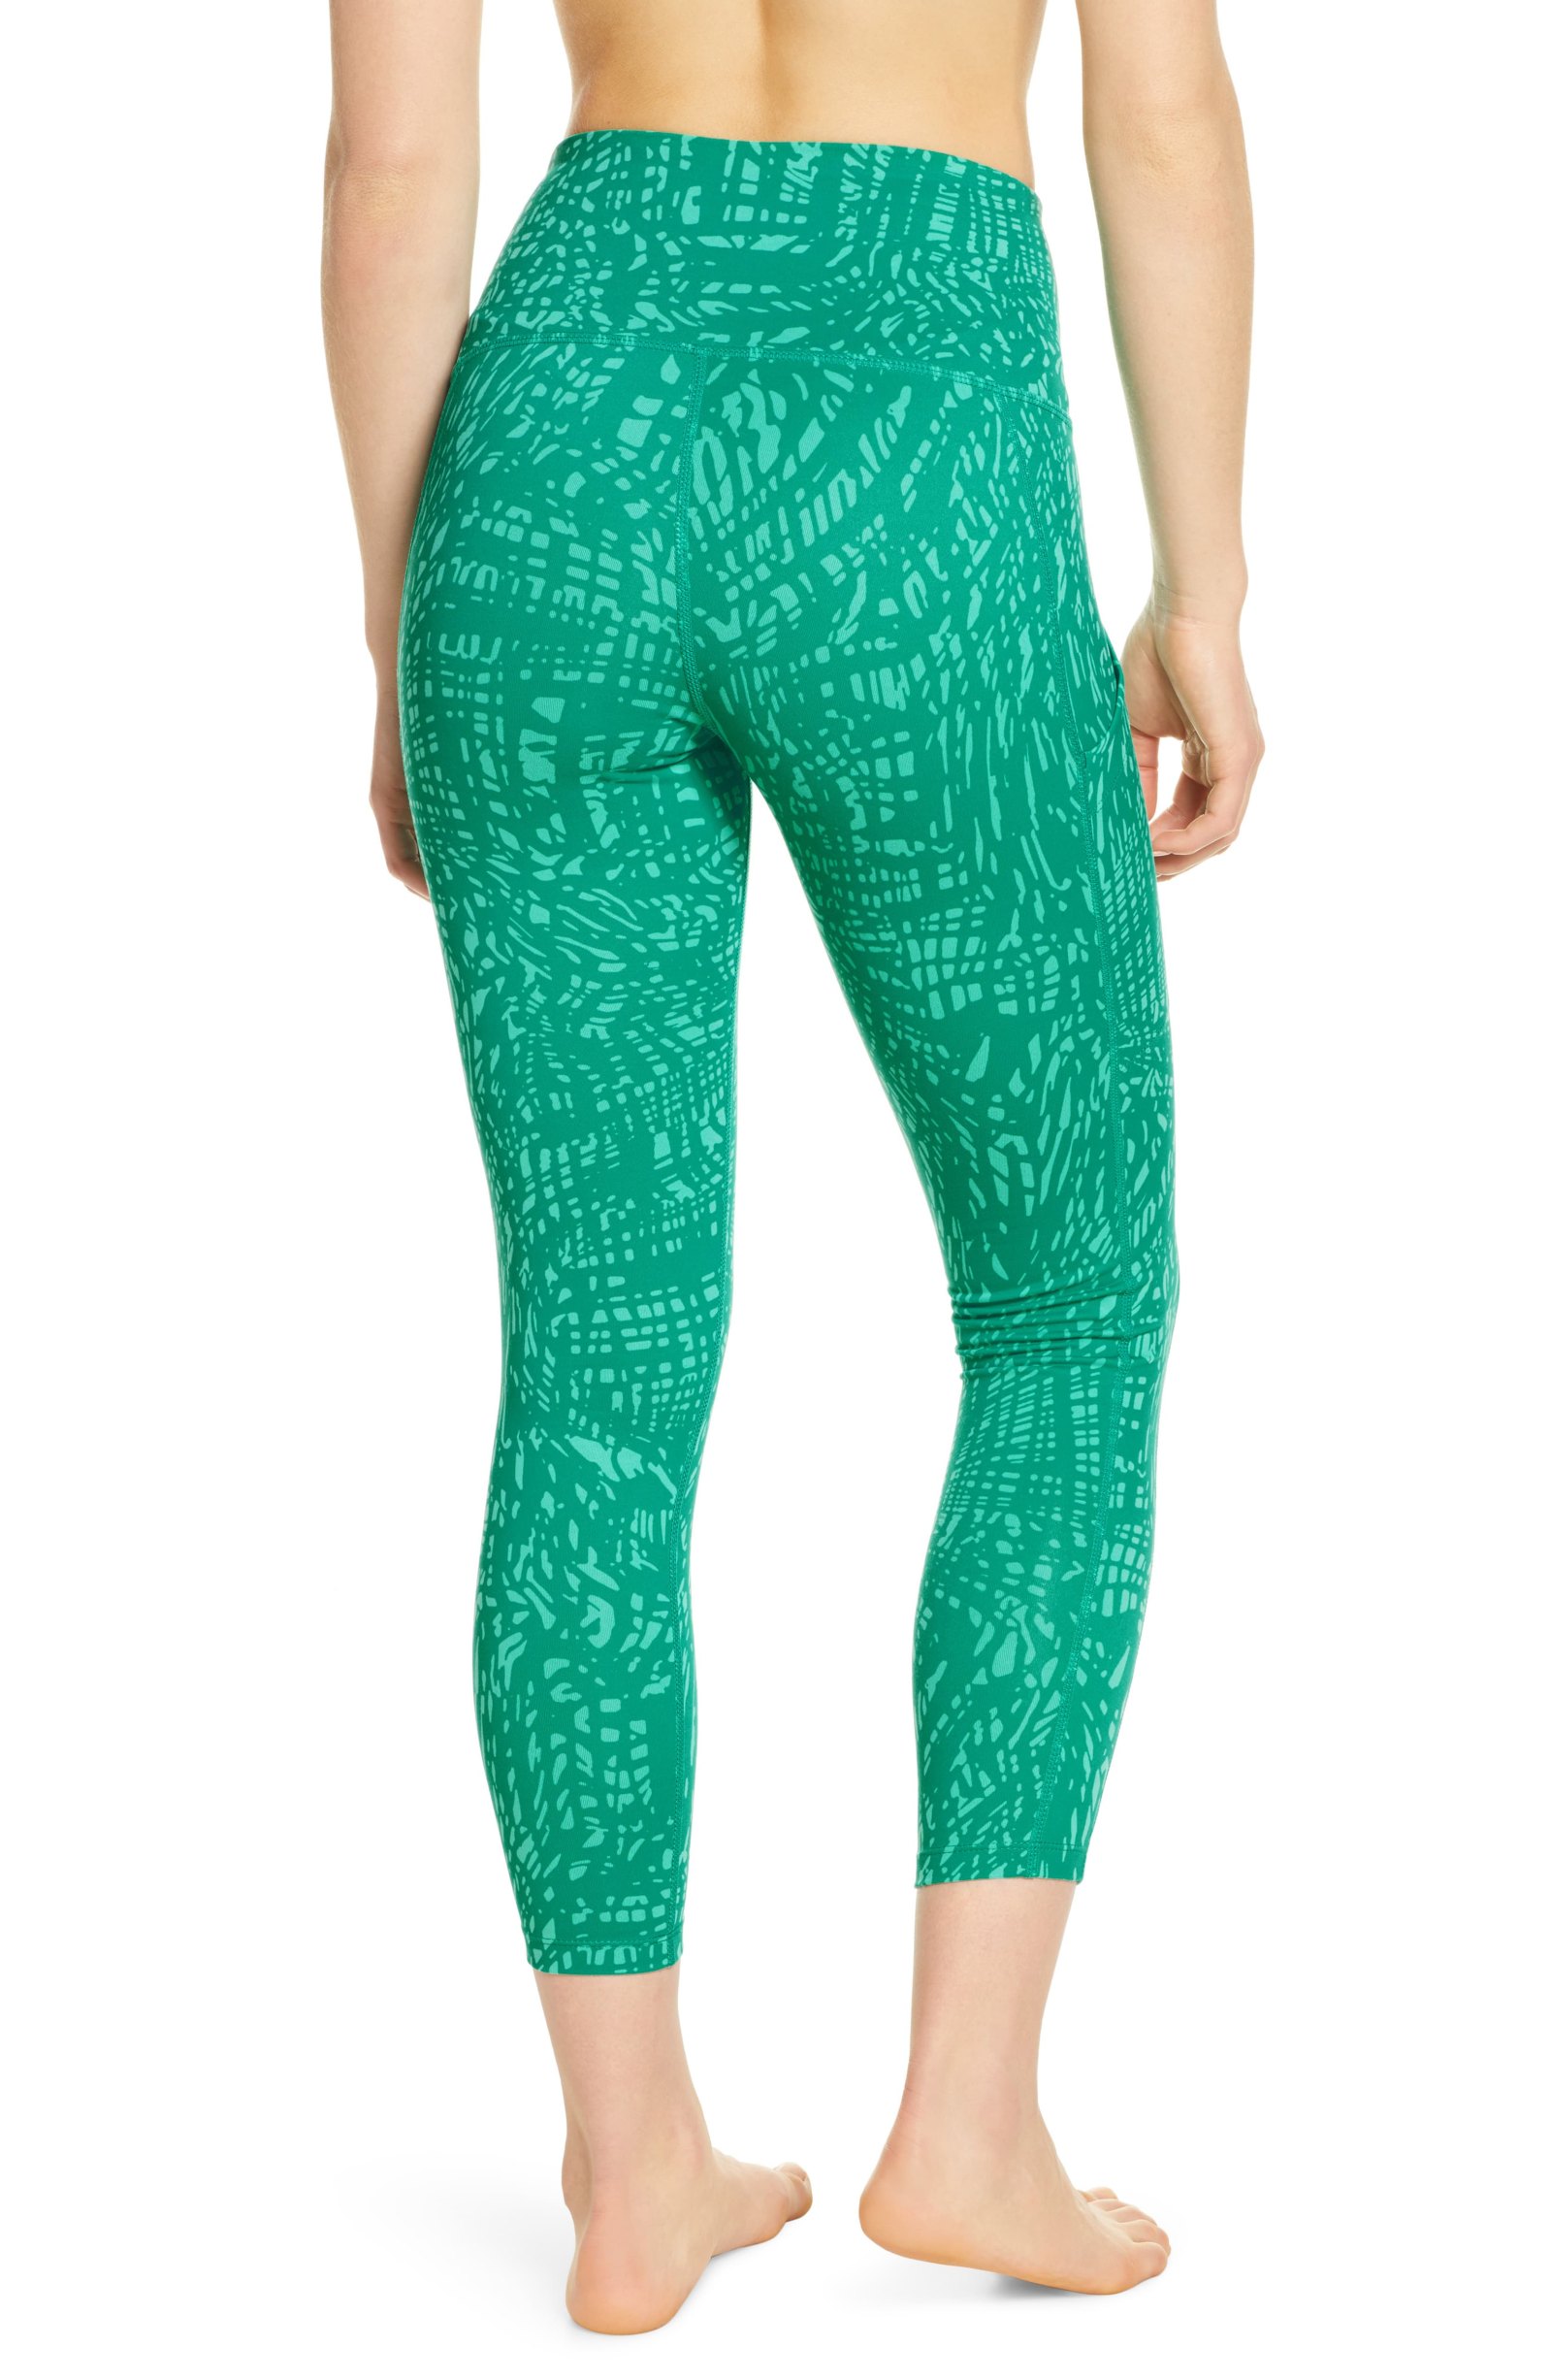 Zella Leggings Come in New Fun Graphic Prints — Now on Sale | Us Weekly